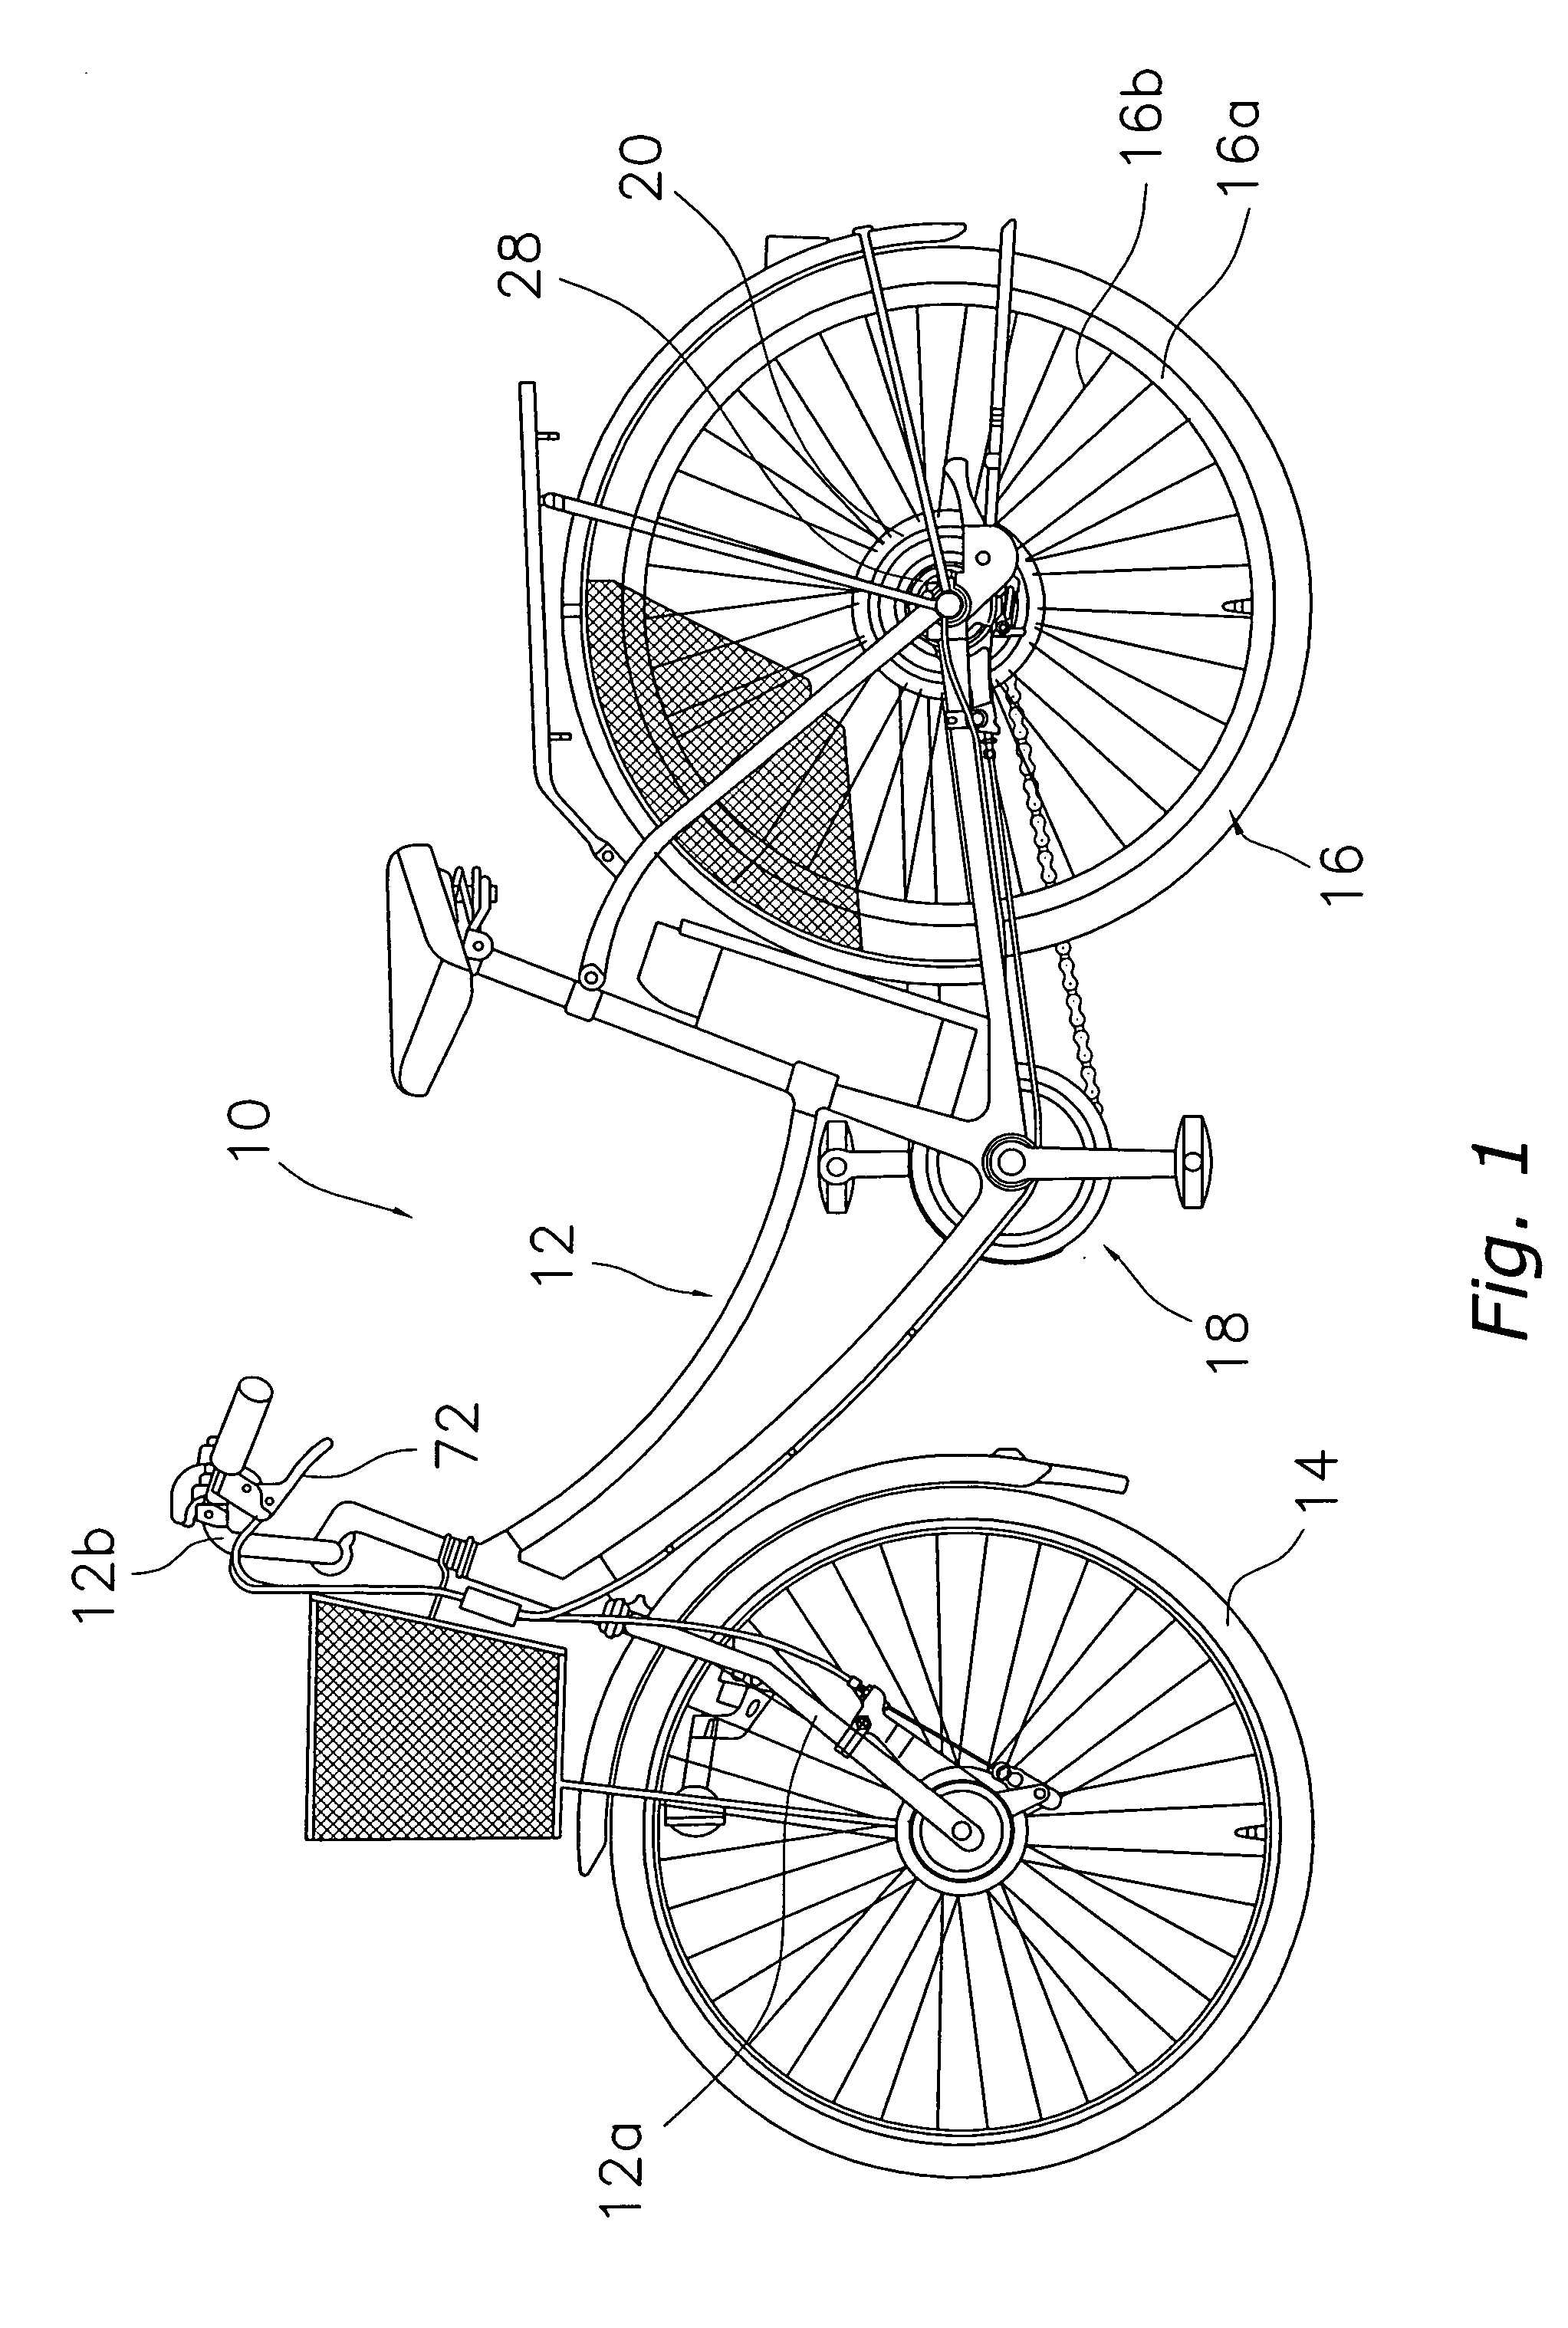 Bicycle wheel driving device